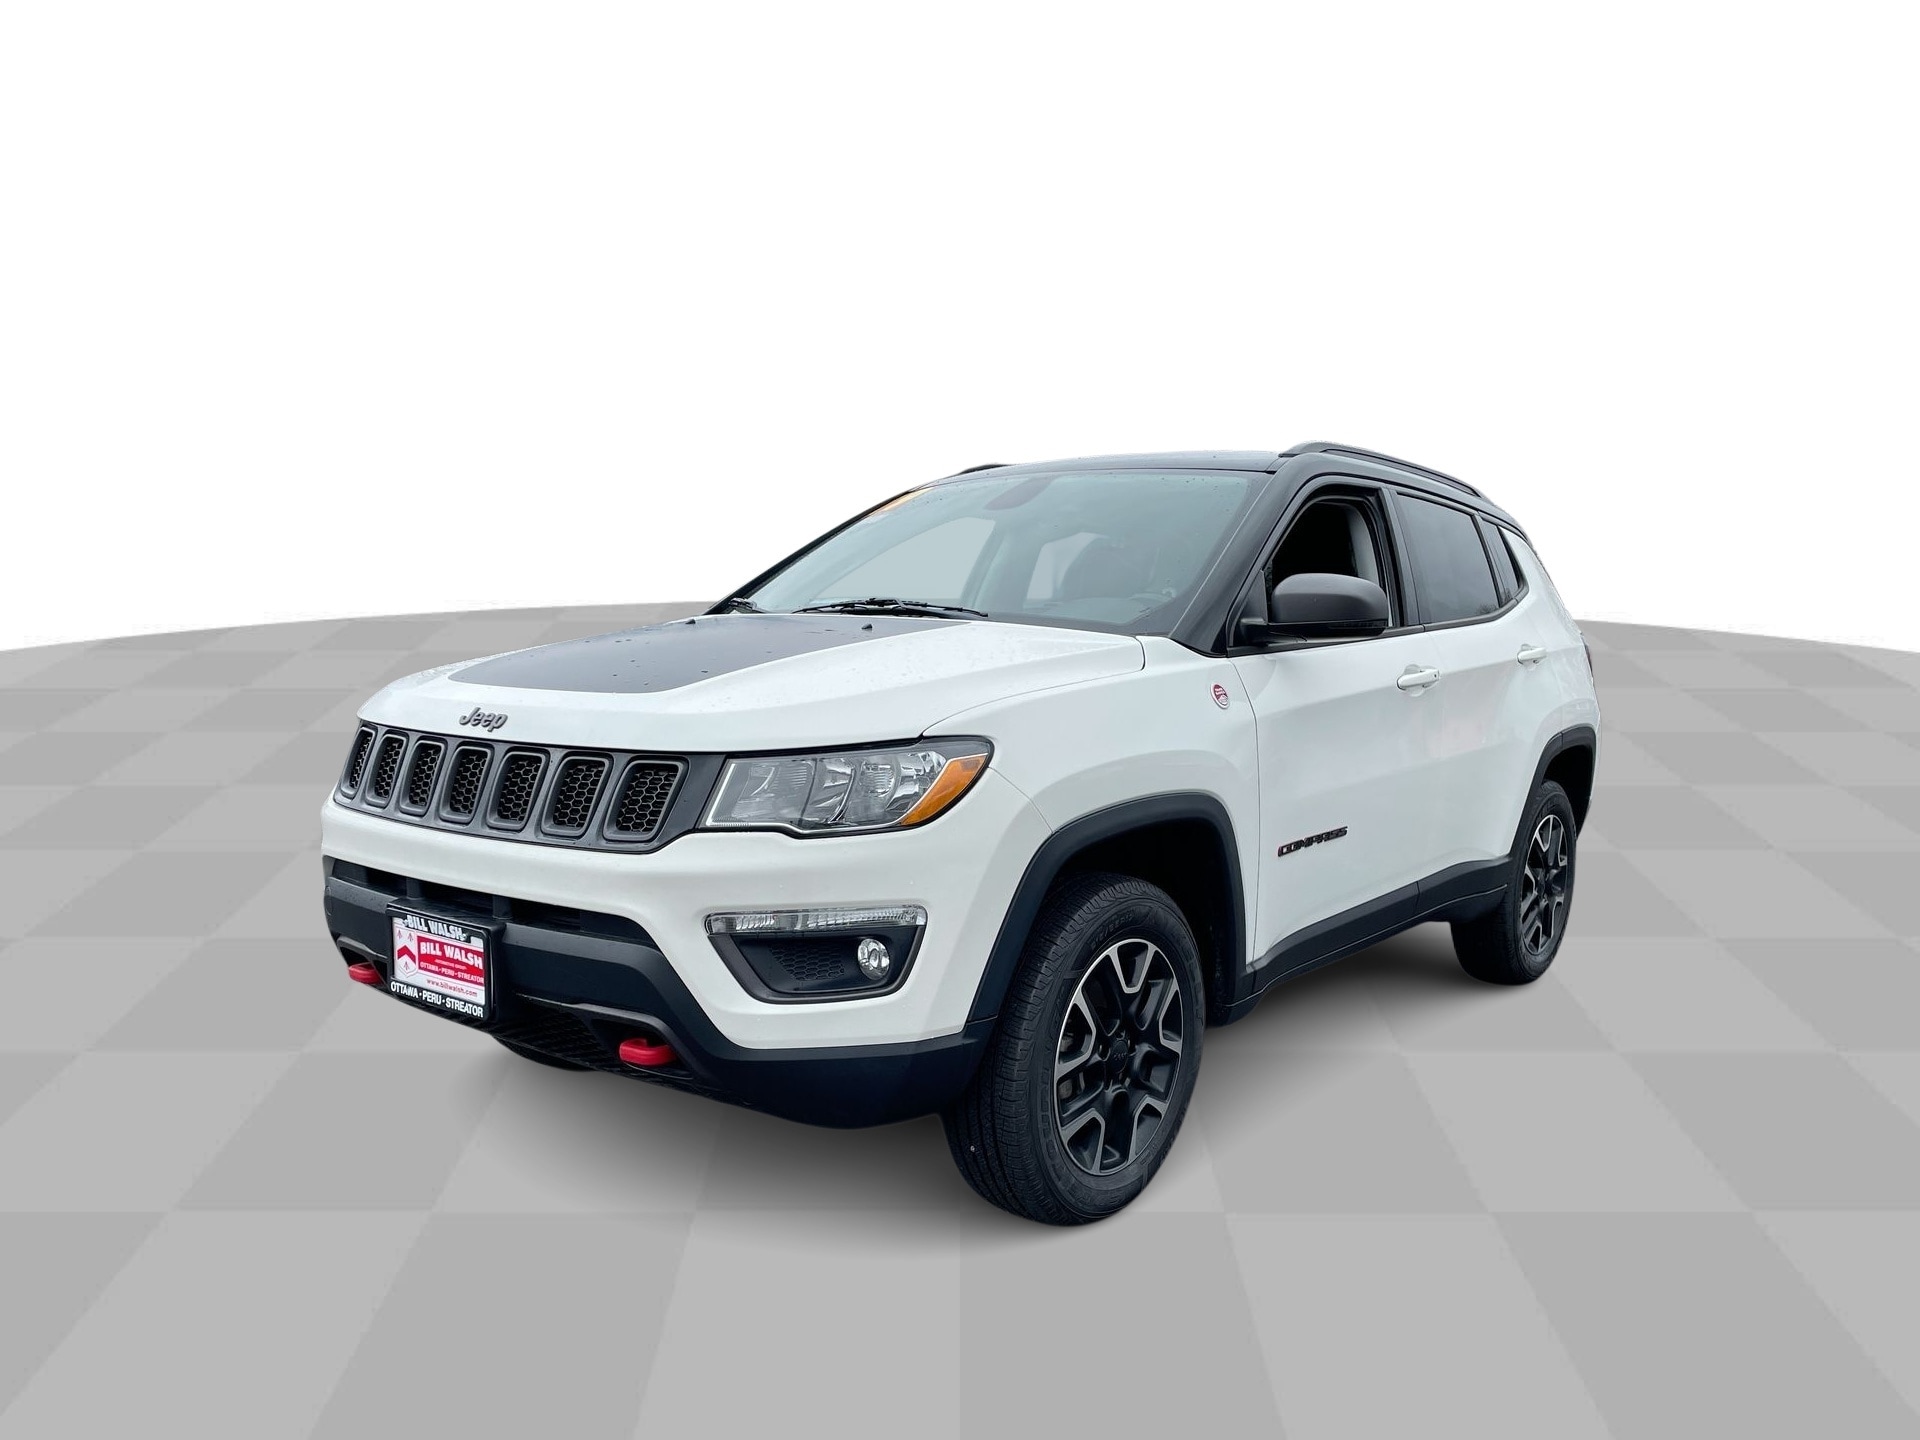 Carbravo 2019 Jeep Compass For Sale at Bill Walsh Ottawa | VIN 